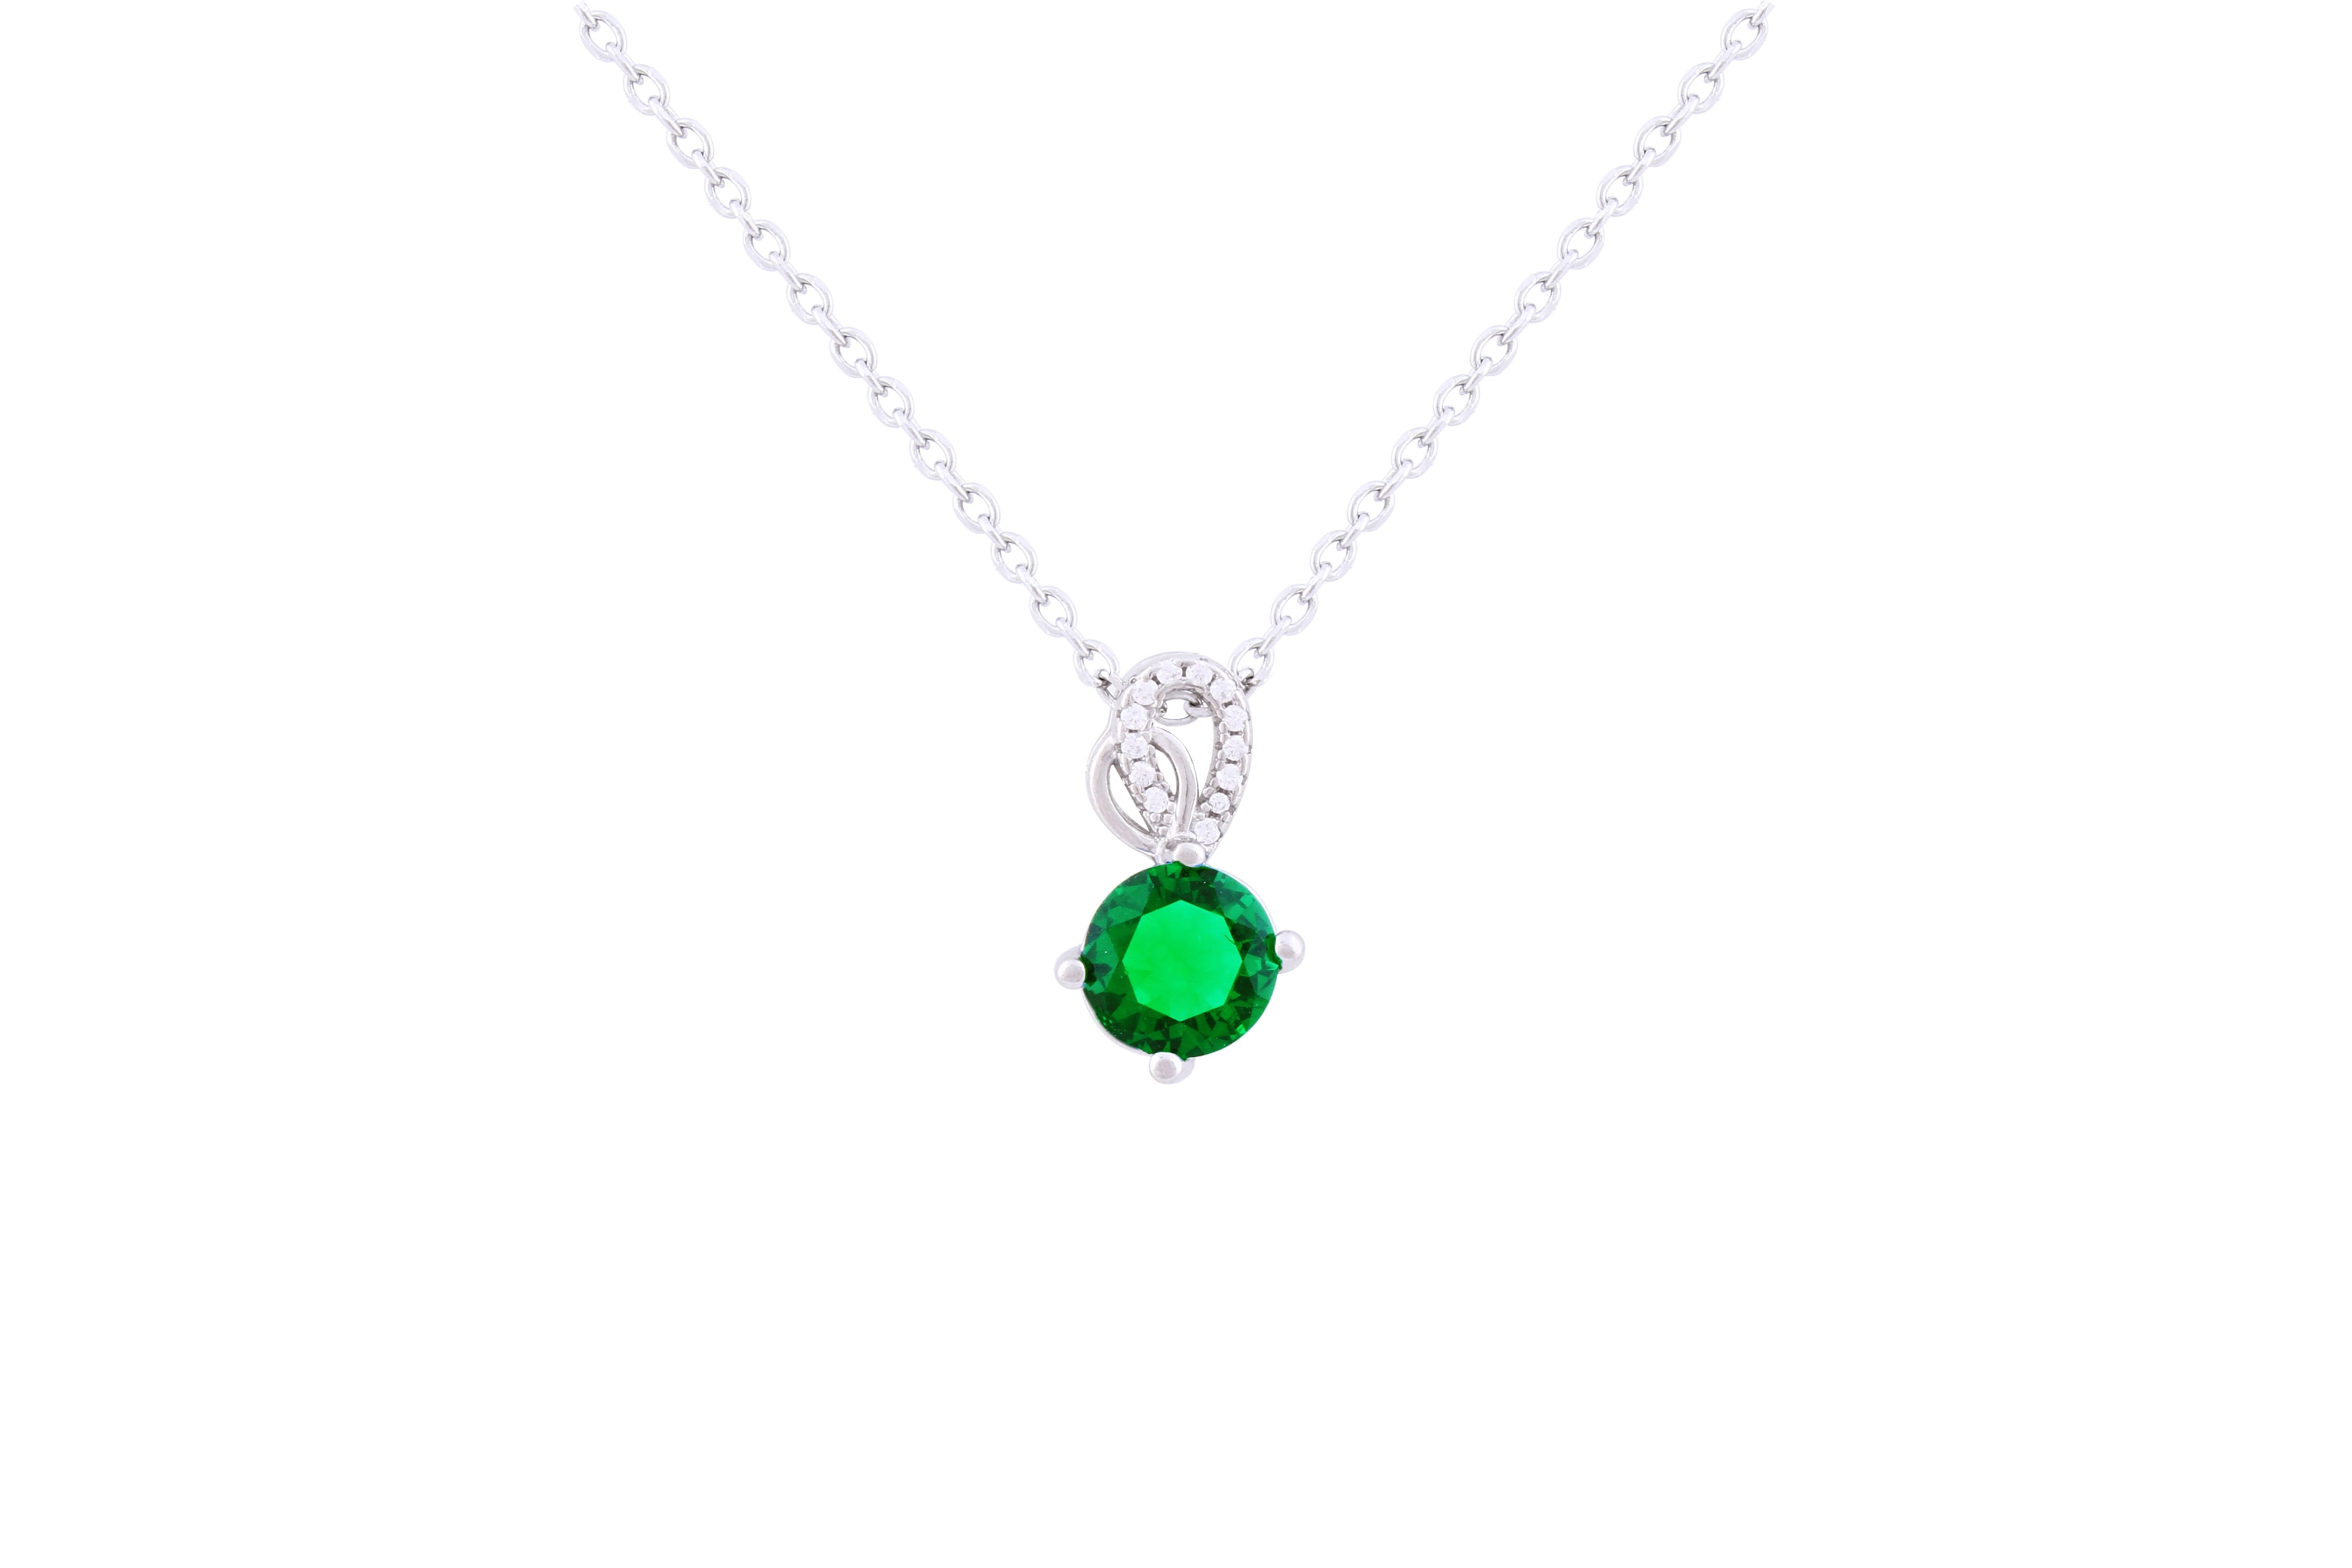 Asfour 925 Sterling Silver Necklace Inlaid With Round Green Zircon Stone NR0500-G